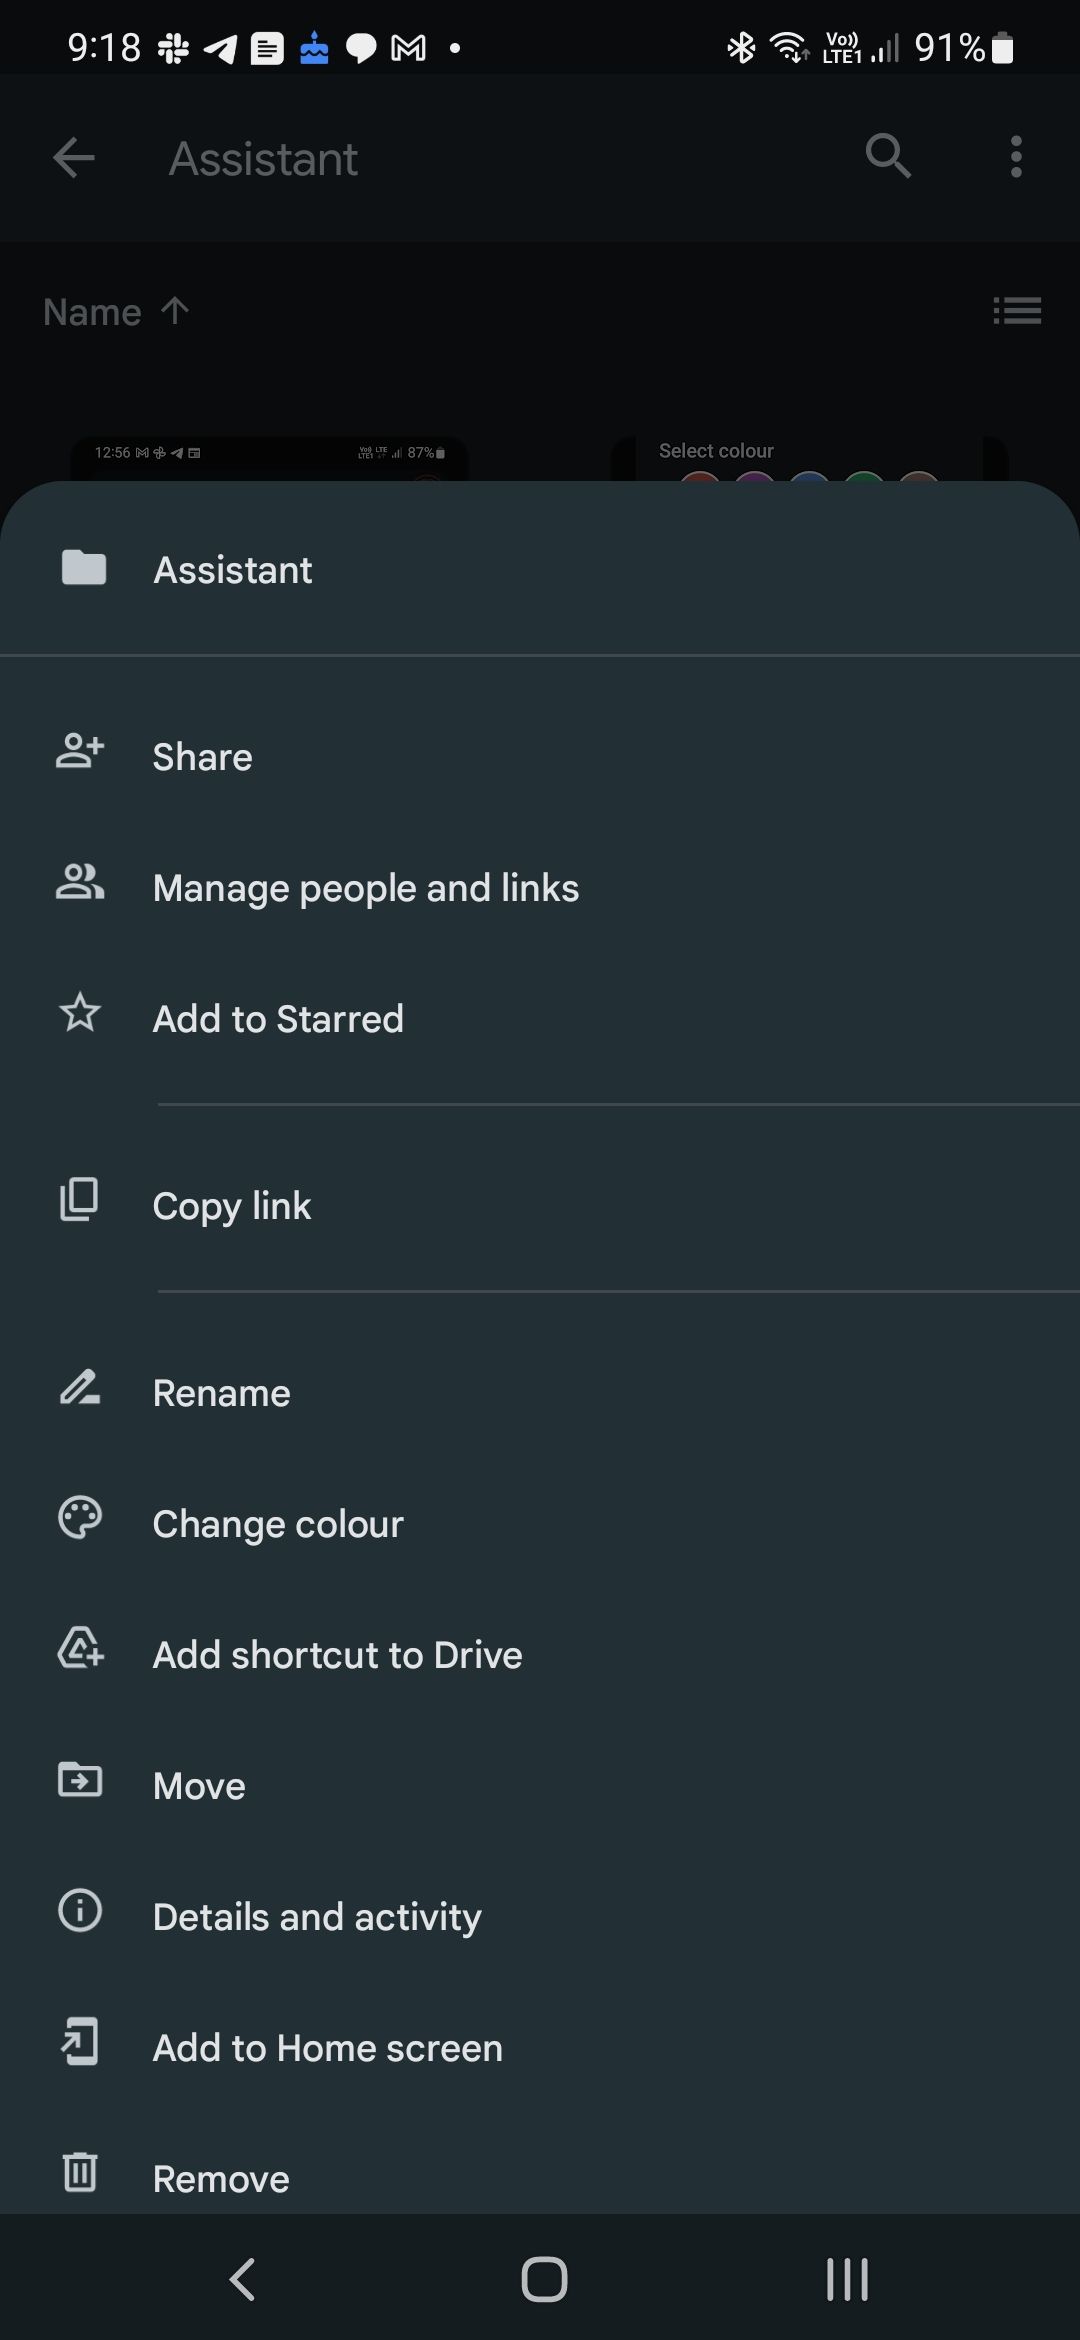 Mobile screenshot of Google Drive's file options for 'Assistant' folder, including 'Share', 'Manage people and links', 'Add to Starred', 'Copy link', 'Rename', 'Change color', 'Add shortcut to Drive', 'Move', 'Details and activity', 'Add to Home screen', and 'Remove'.